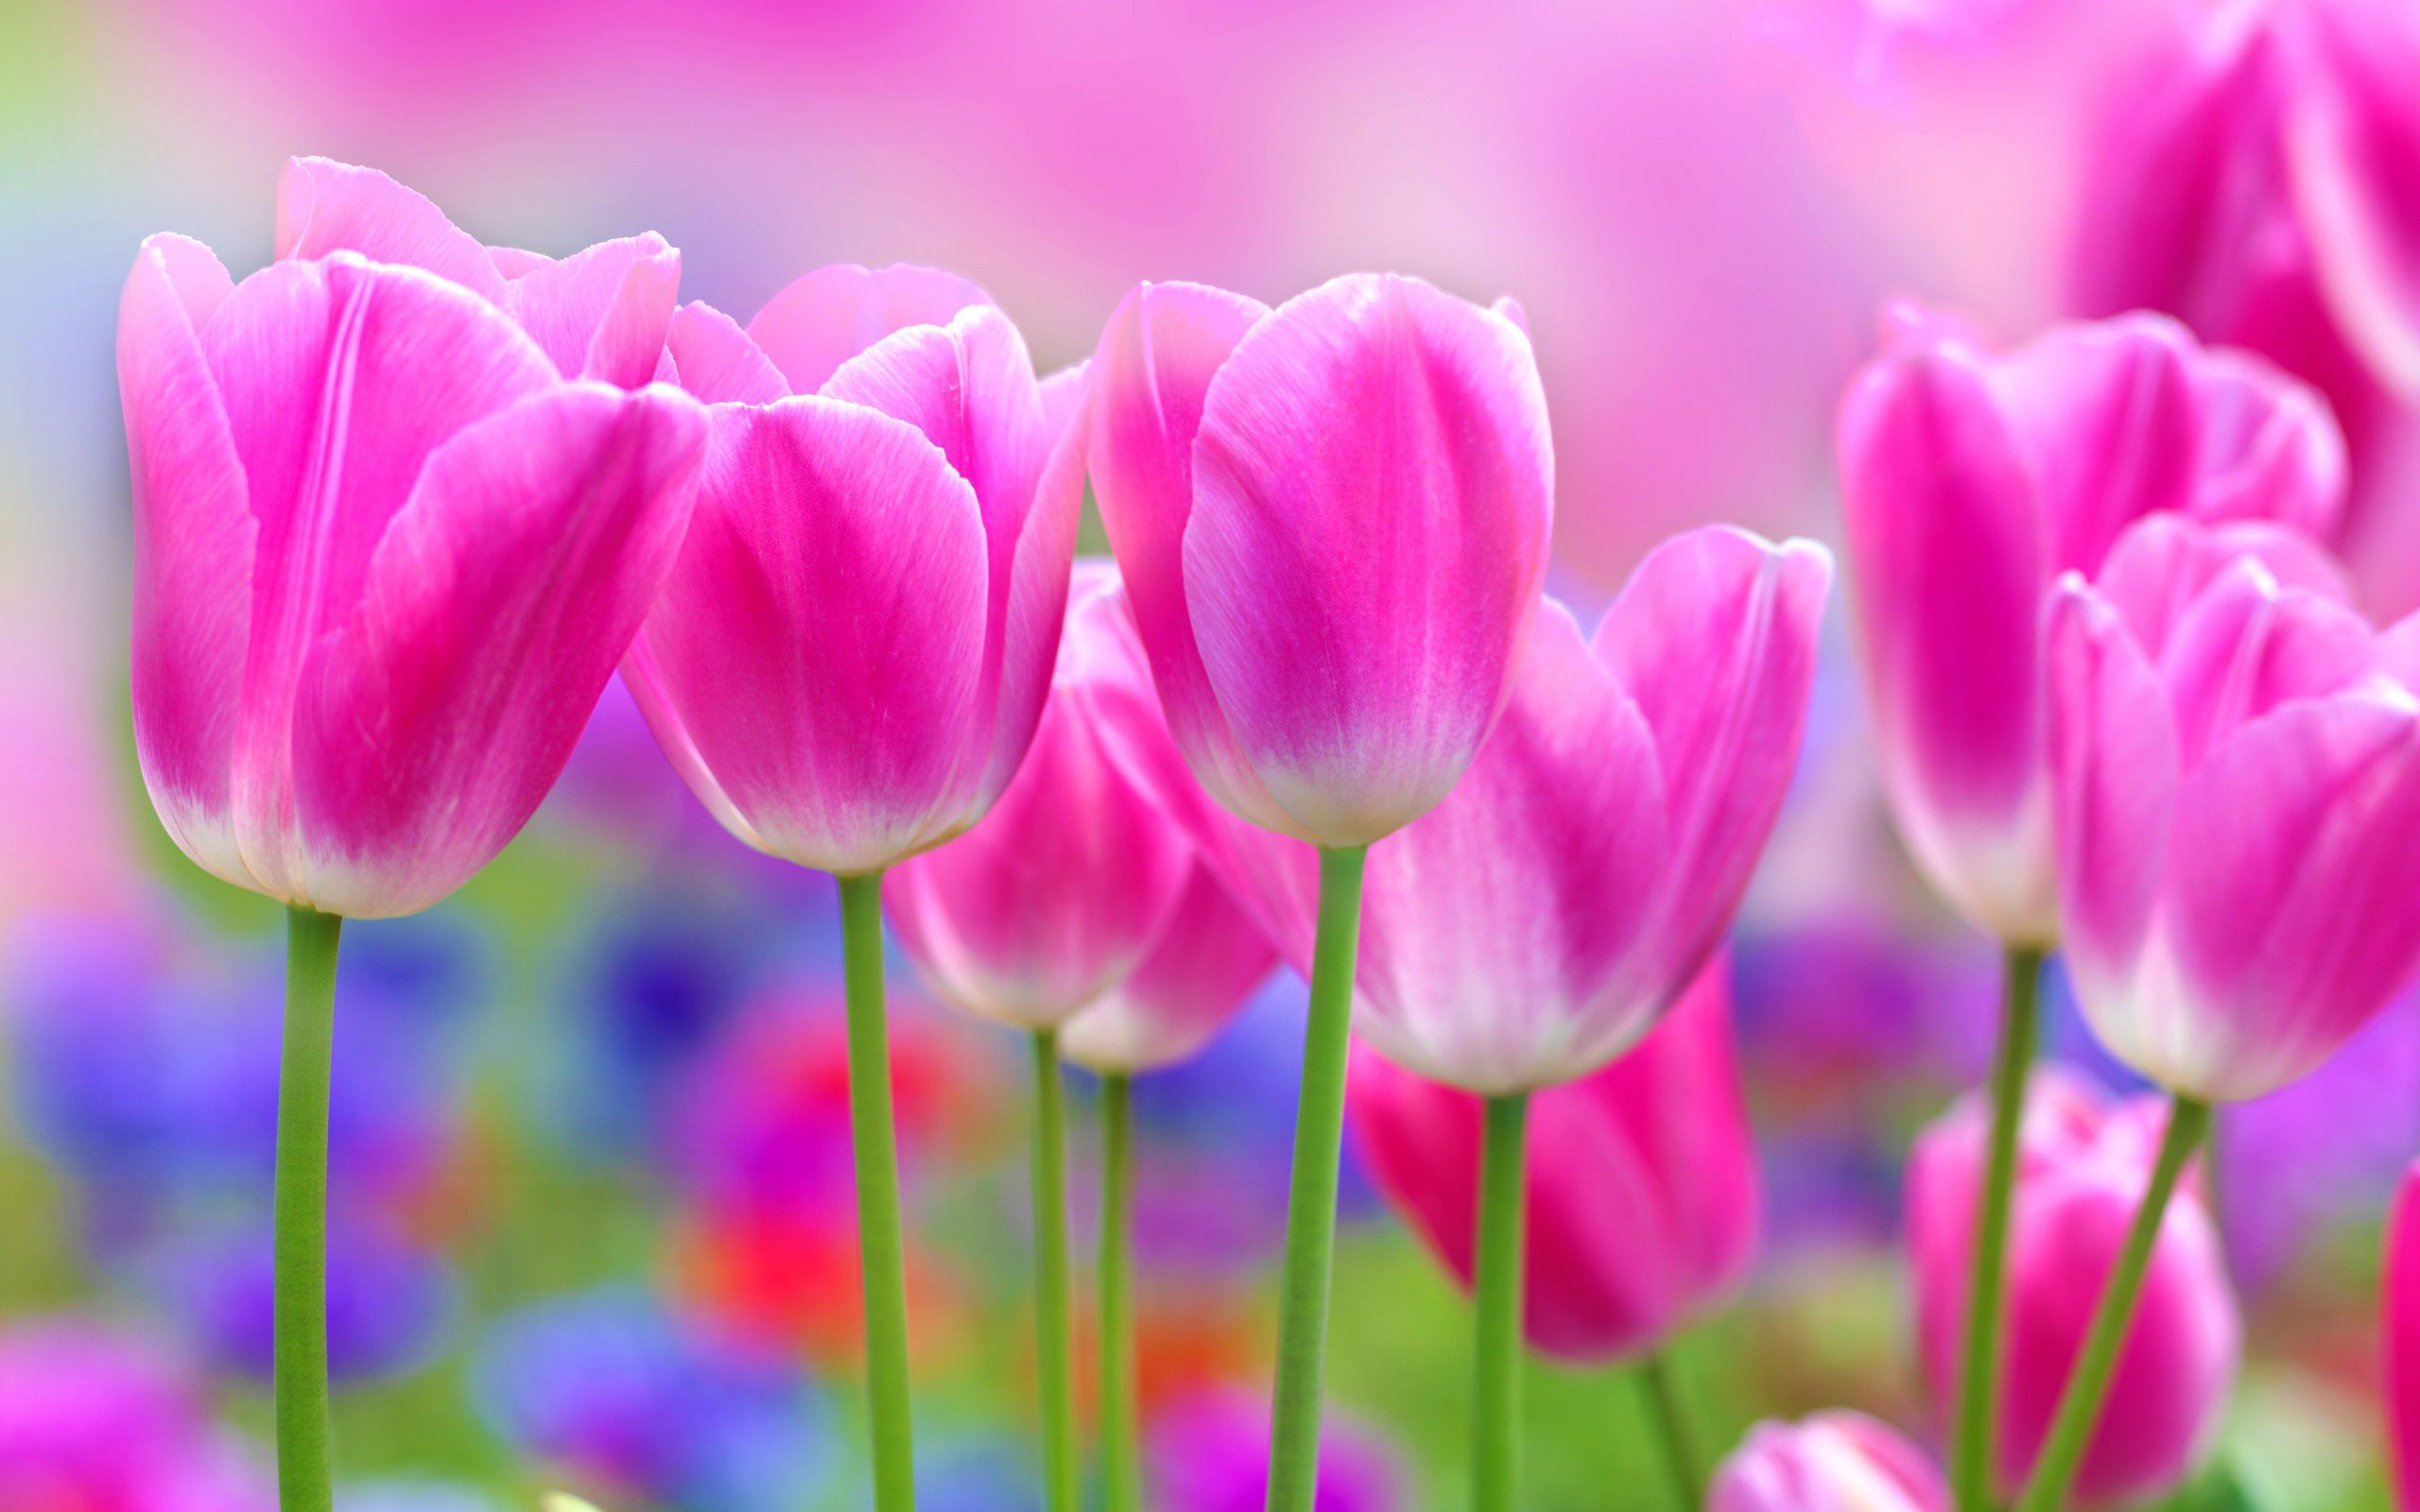 Tulips Wallpaper Image Photos Pictures Background